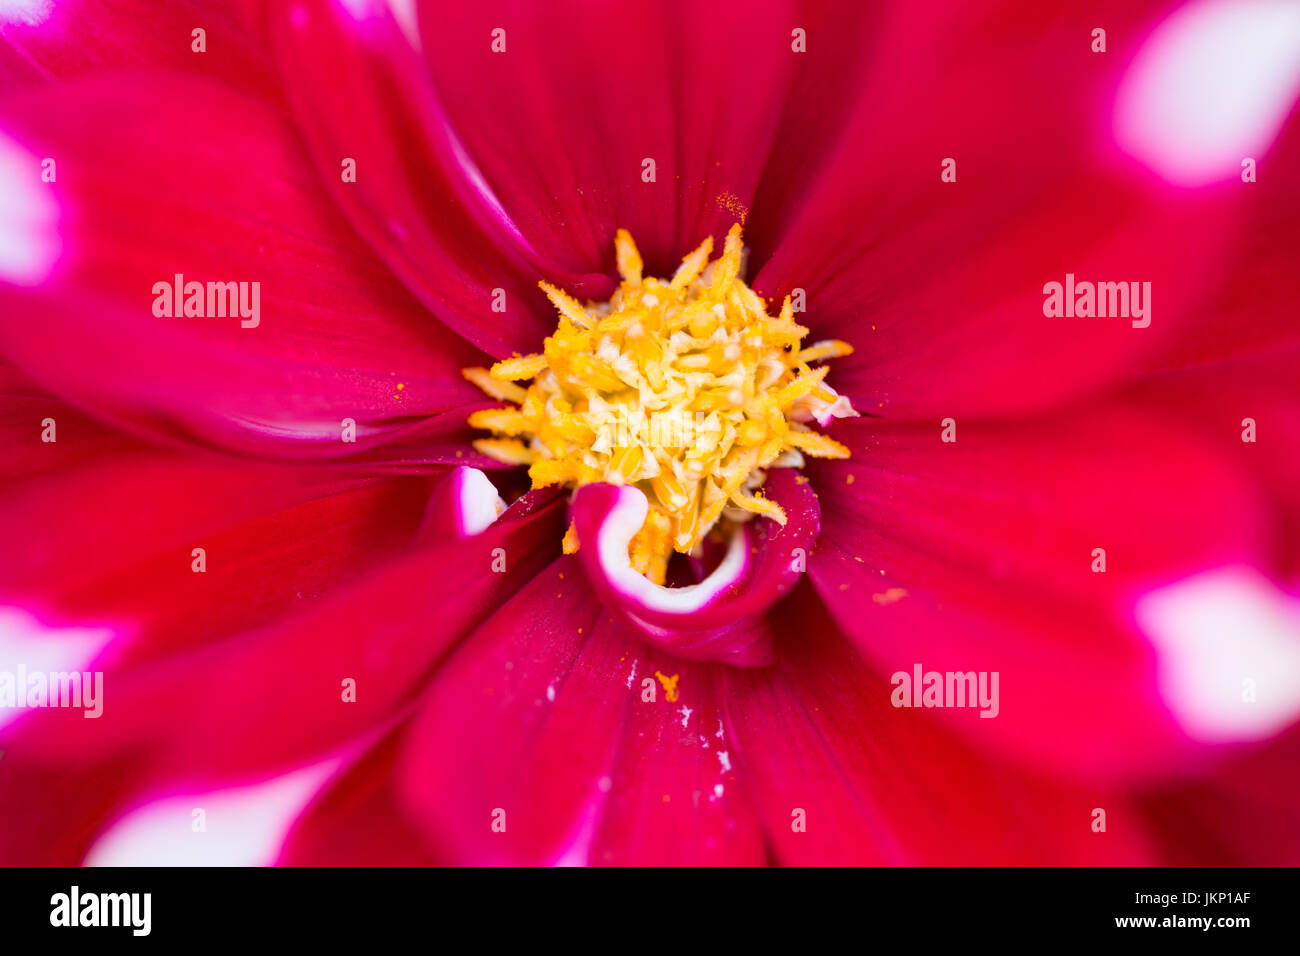 Merthyr Tydfil, South Wales, UK. 24 July 2017. UK weather: Dahlia in bloom in the sunny evening light today. Credit: Andrew Bartlett/Alamy Live News. Stock Photo